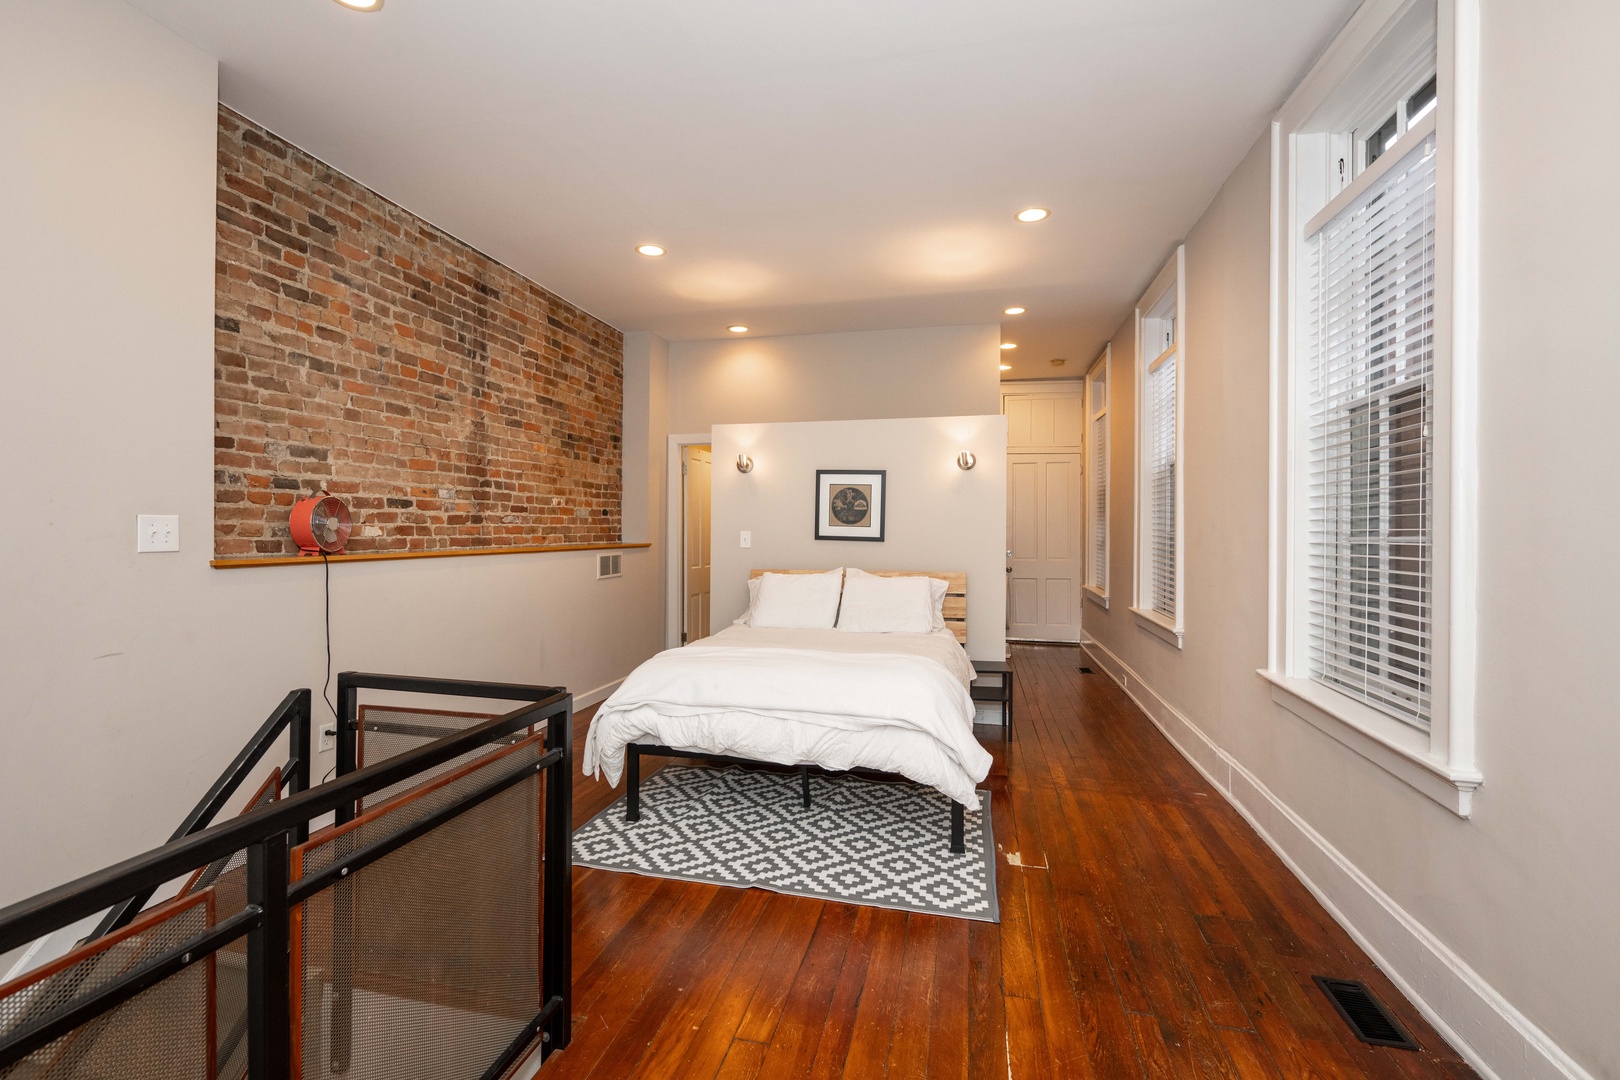 The loft sleeping area boasts a plush queen bed, ensuite, & laundry access